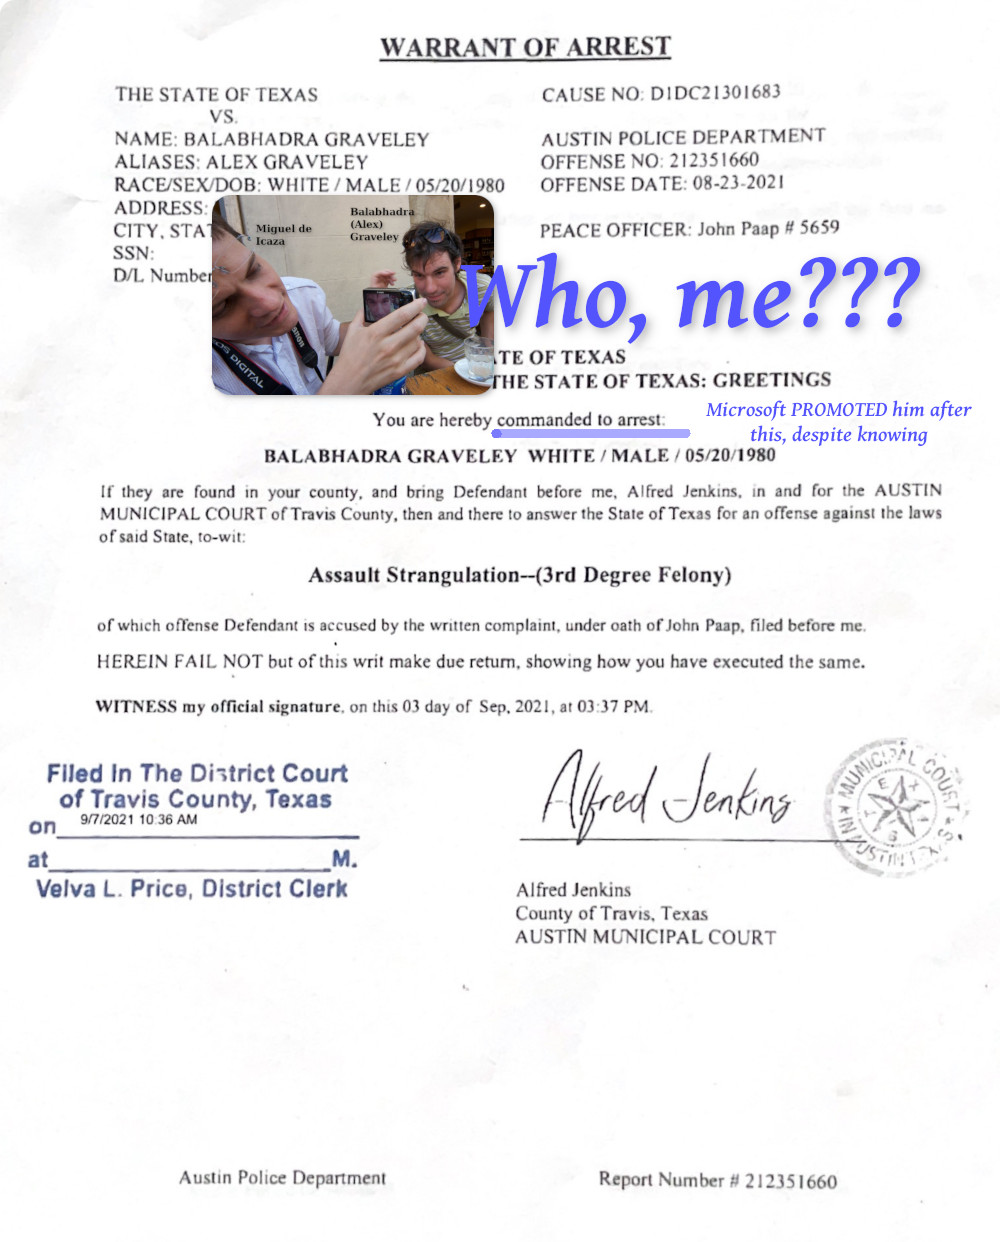 Alex Graveley arrest warrant page 1; Microsoft PROMOTED him after this, despite knowing